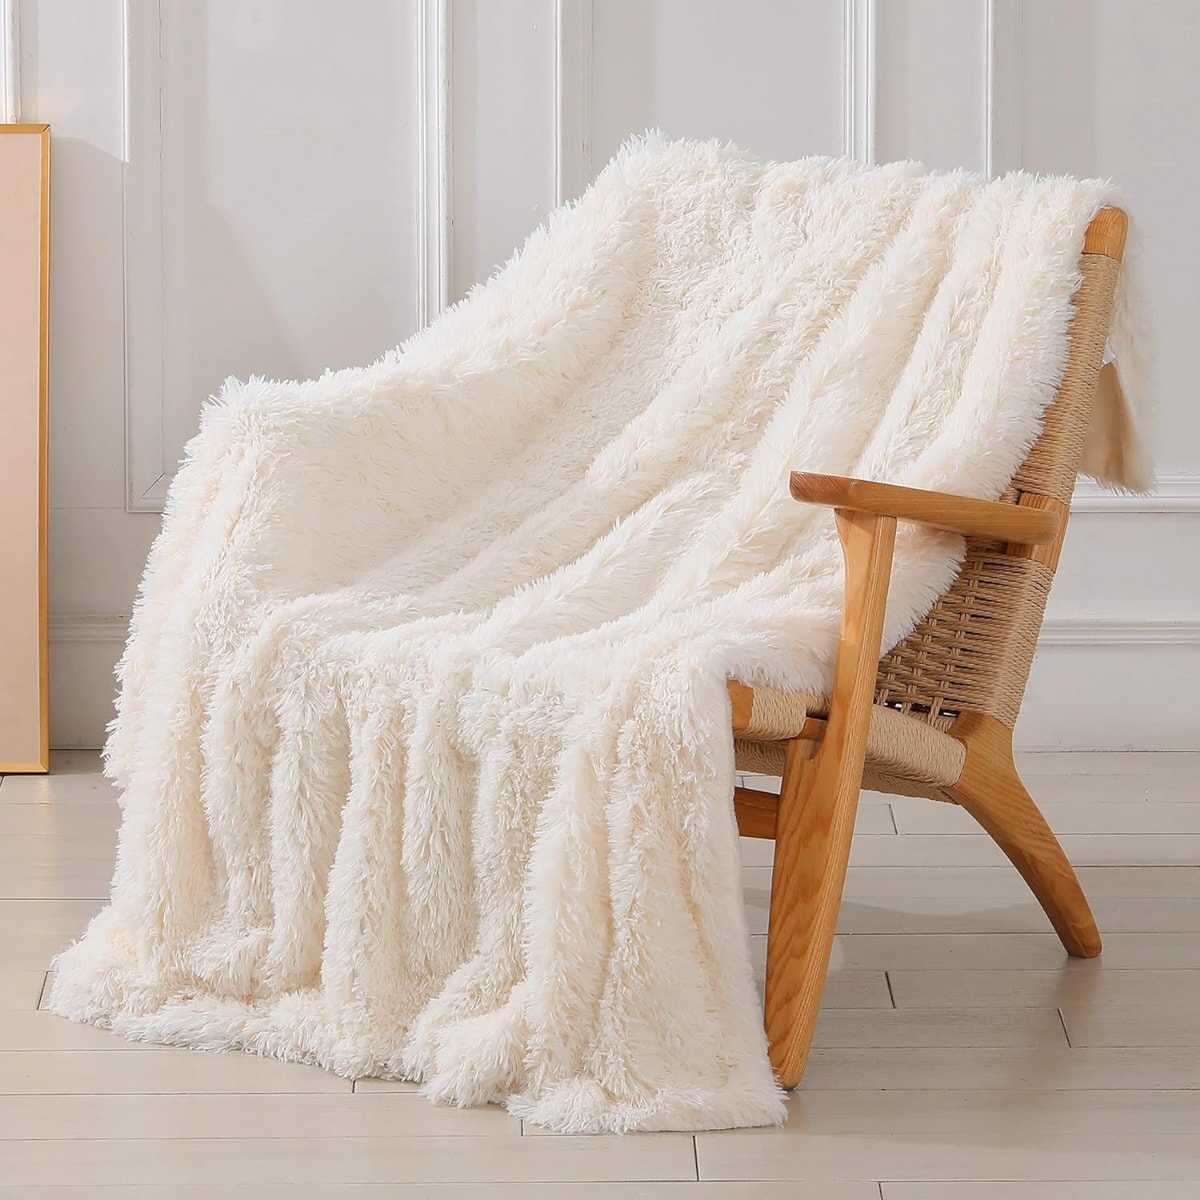 An off-white fuzzy blanket hanging over a wood chair.